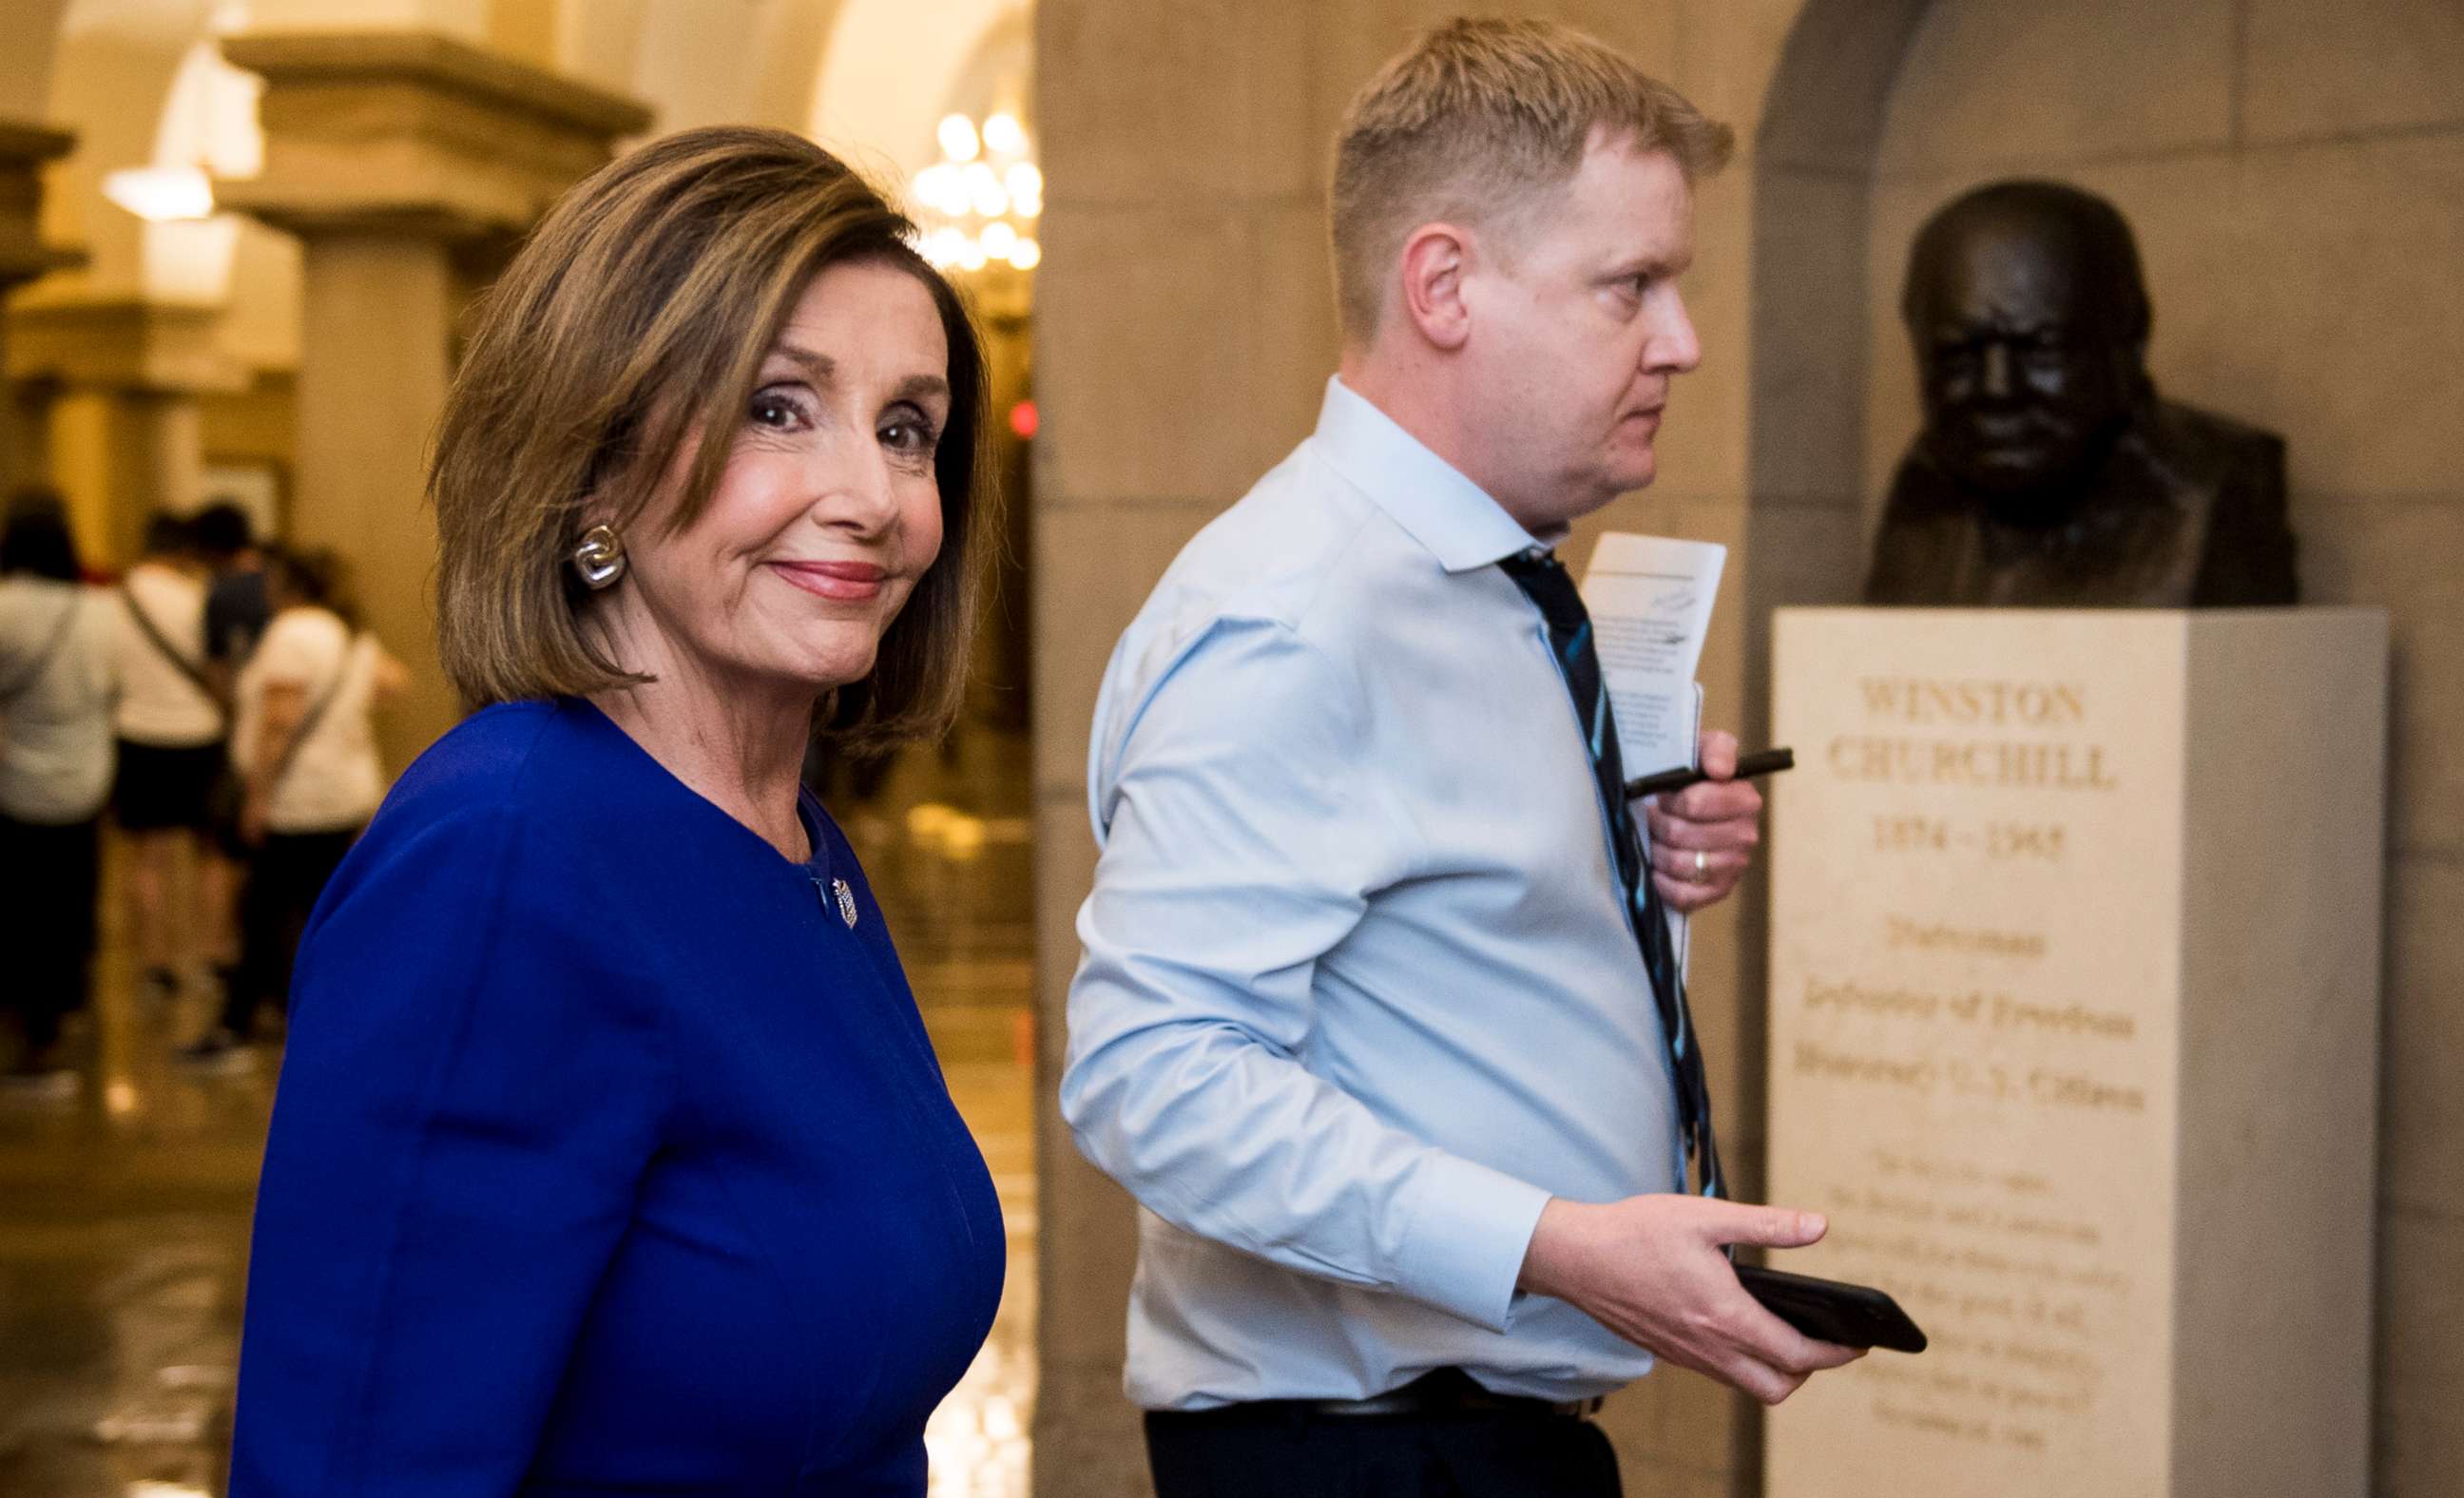 PHOTO: Speaker of the House Nancy Pelosi walks with her Deputy Chief of Staff Drew Hamill past the Sir Winston Churchill bust as she exits the Capitol on Sept. 24, 2019.